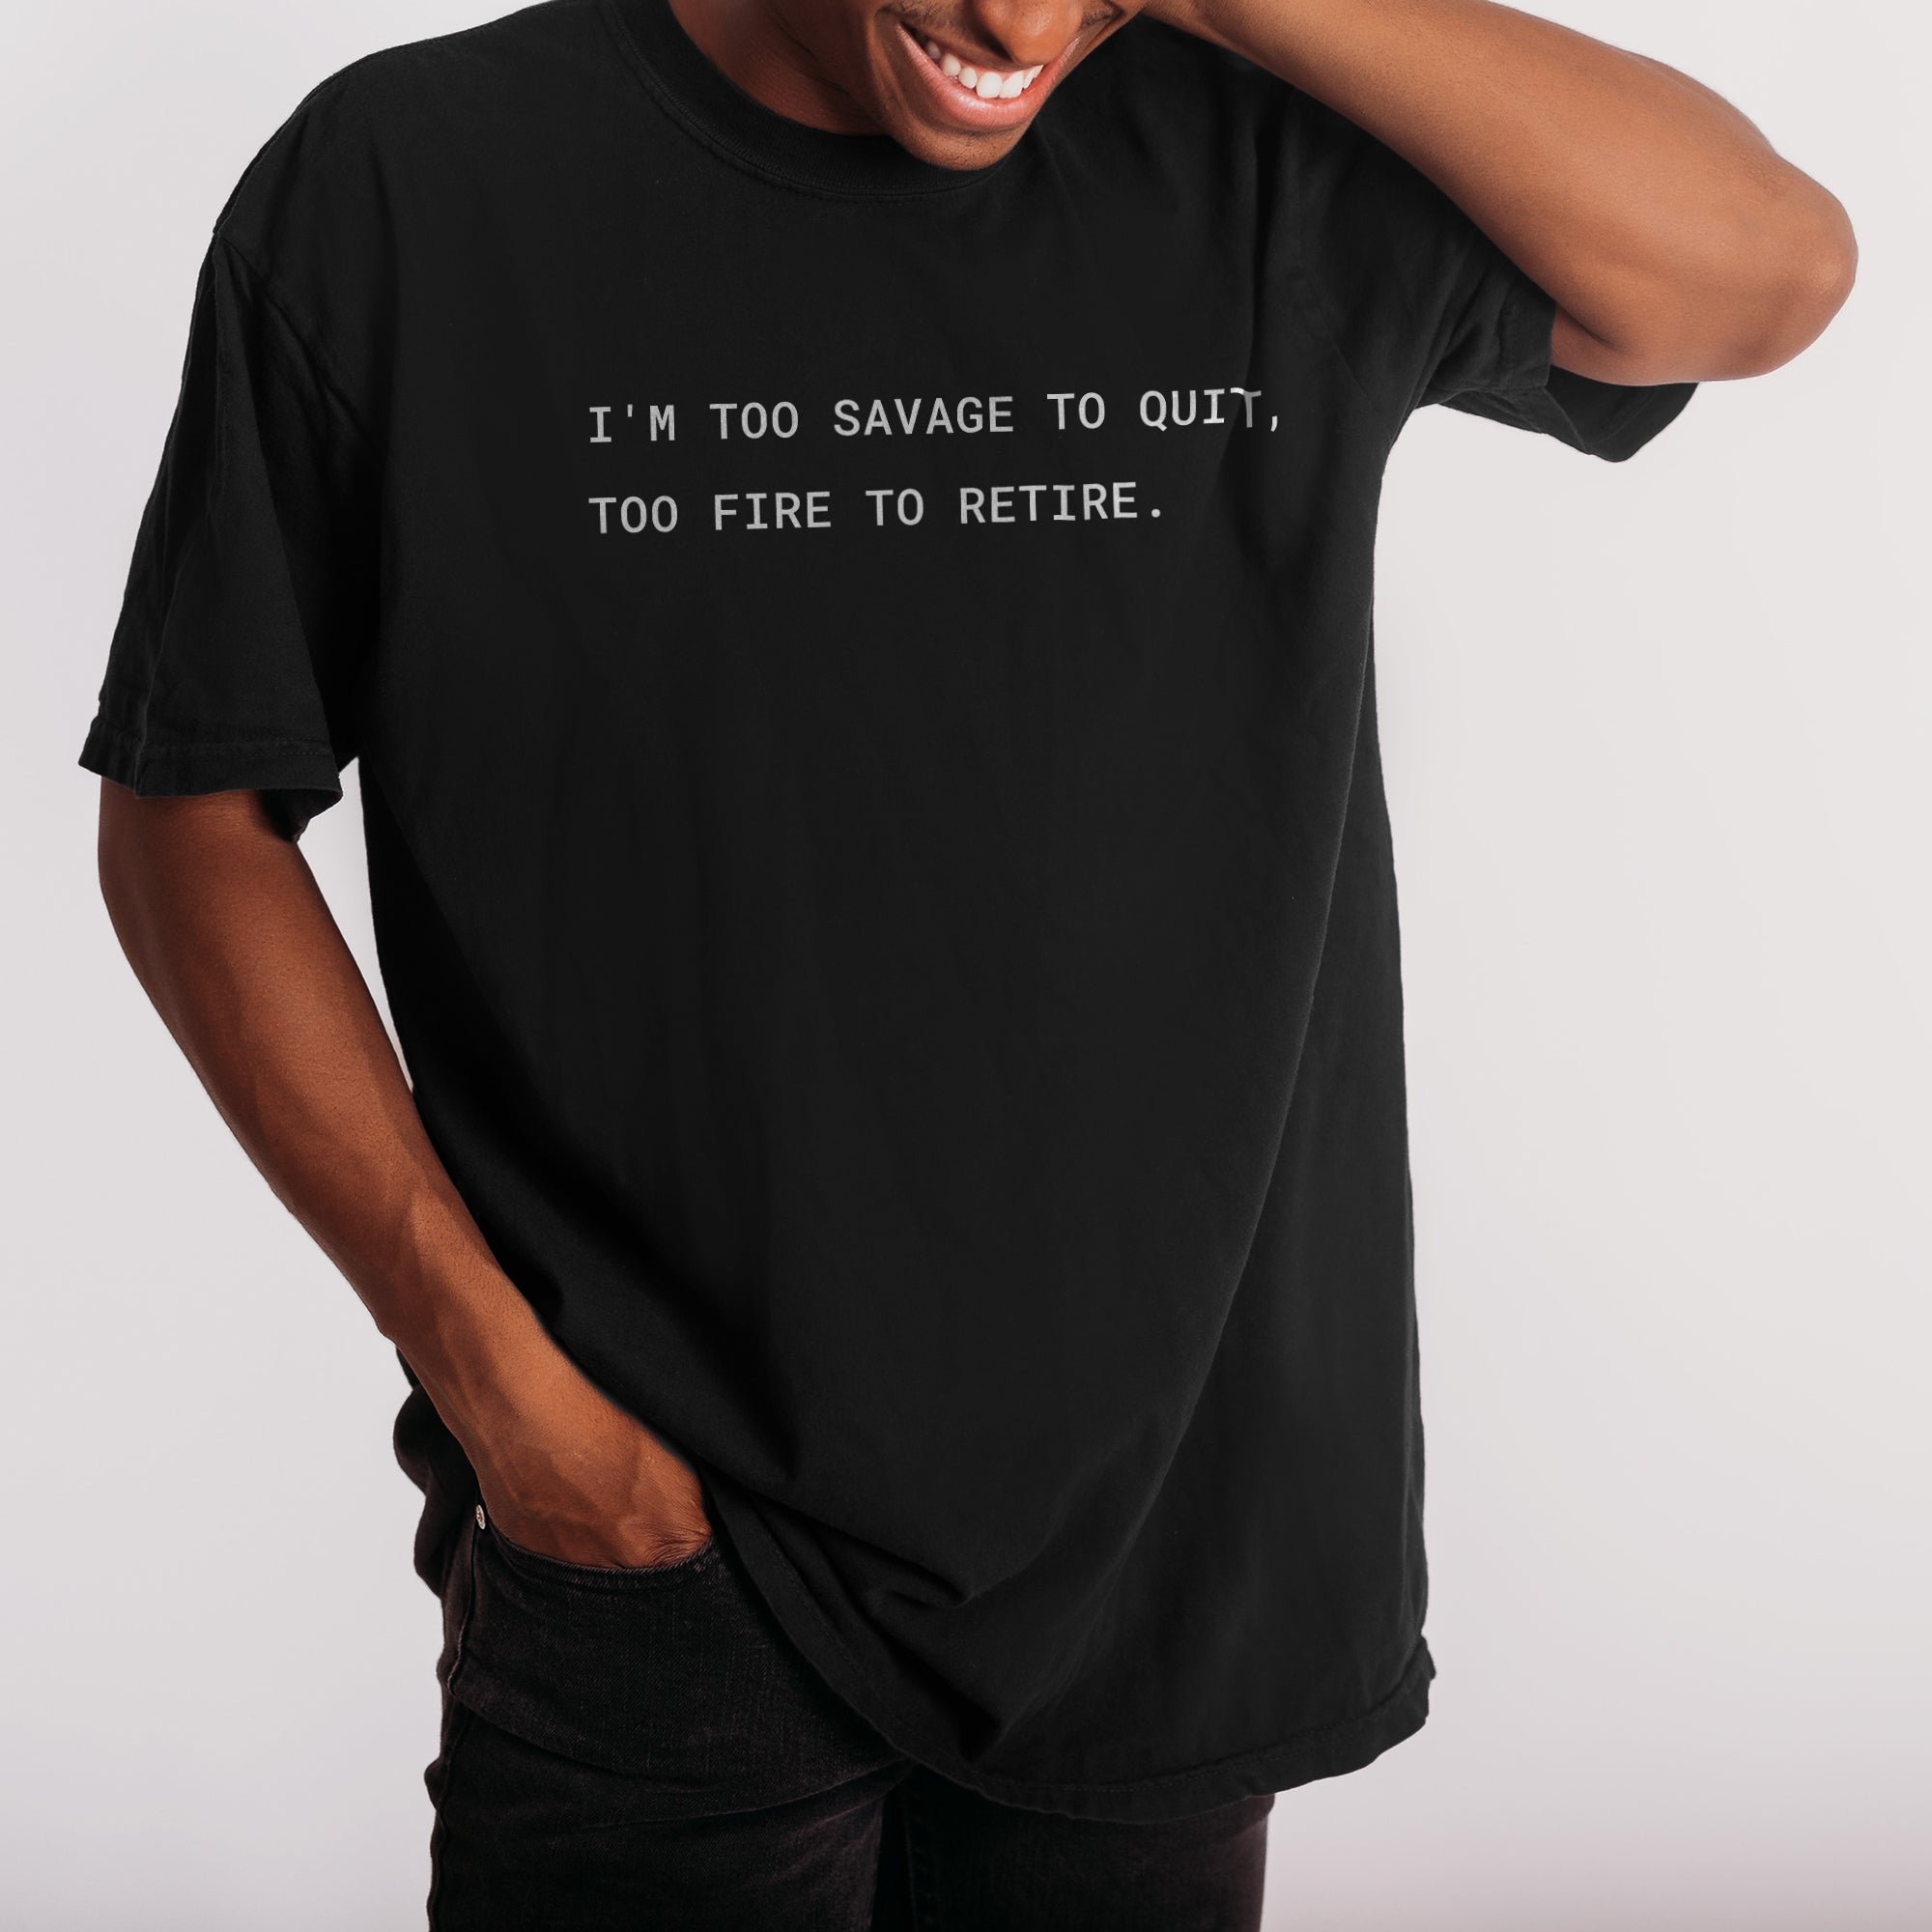 I'm Too Savage to Quit, Too Fire to Retire Boyfriend Crew Tee Solid Black Closeup Artwork and Texture